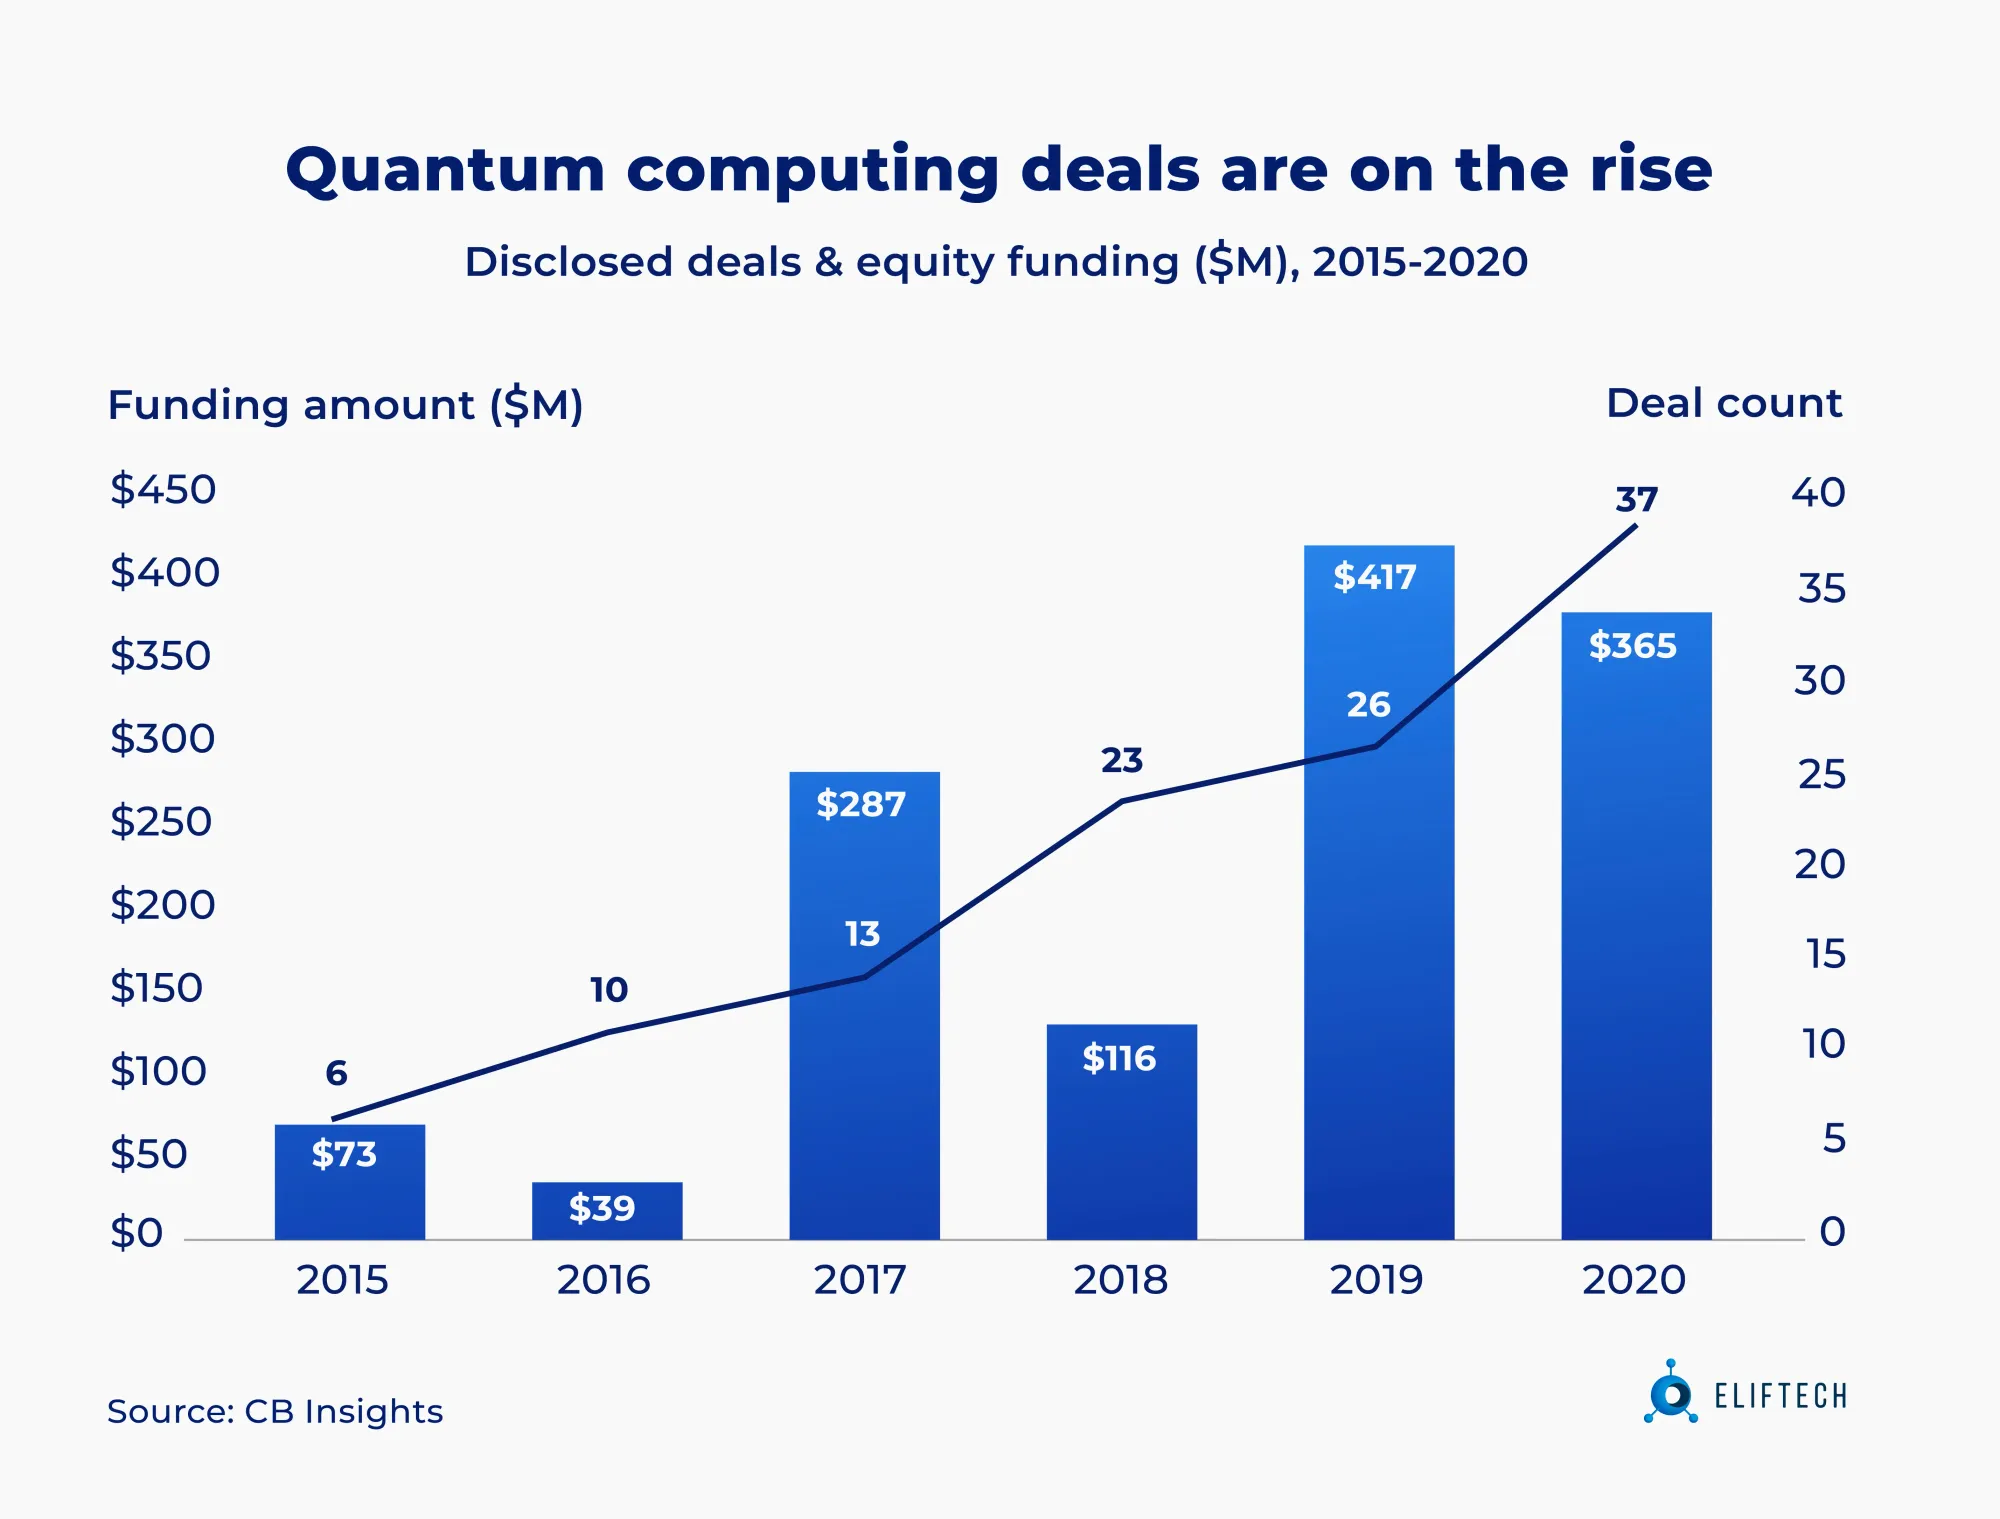 Deals to quantum computing-focused startups have climbed steadily over the last few years.